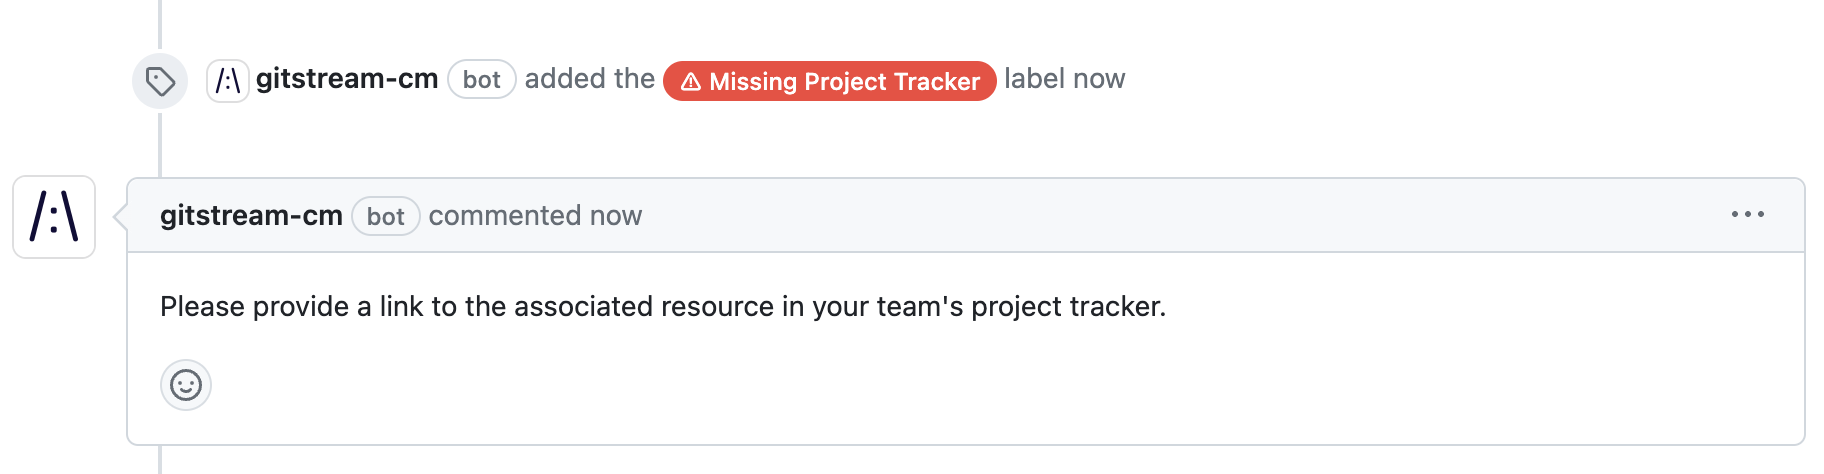 Label Missing Project Tracker